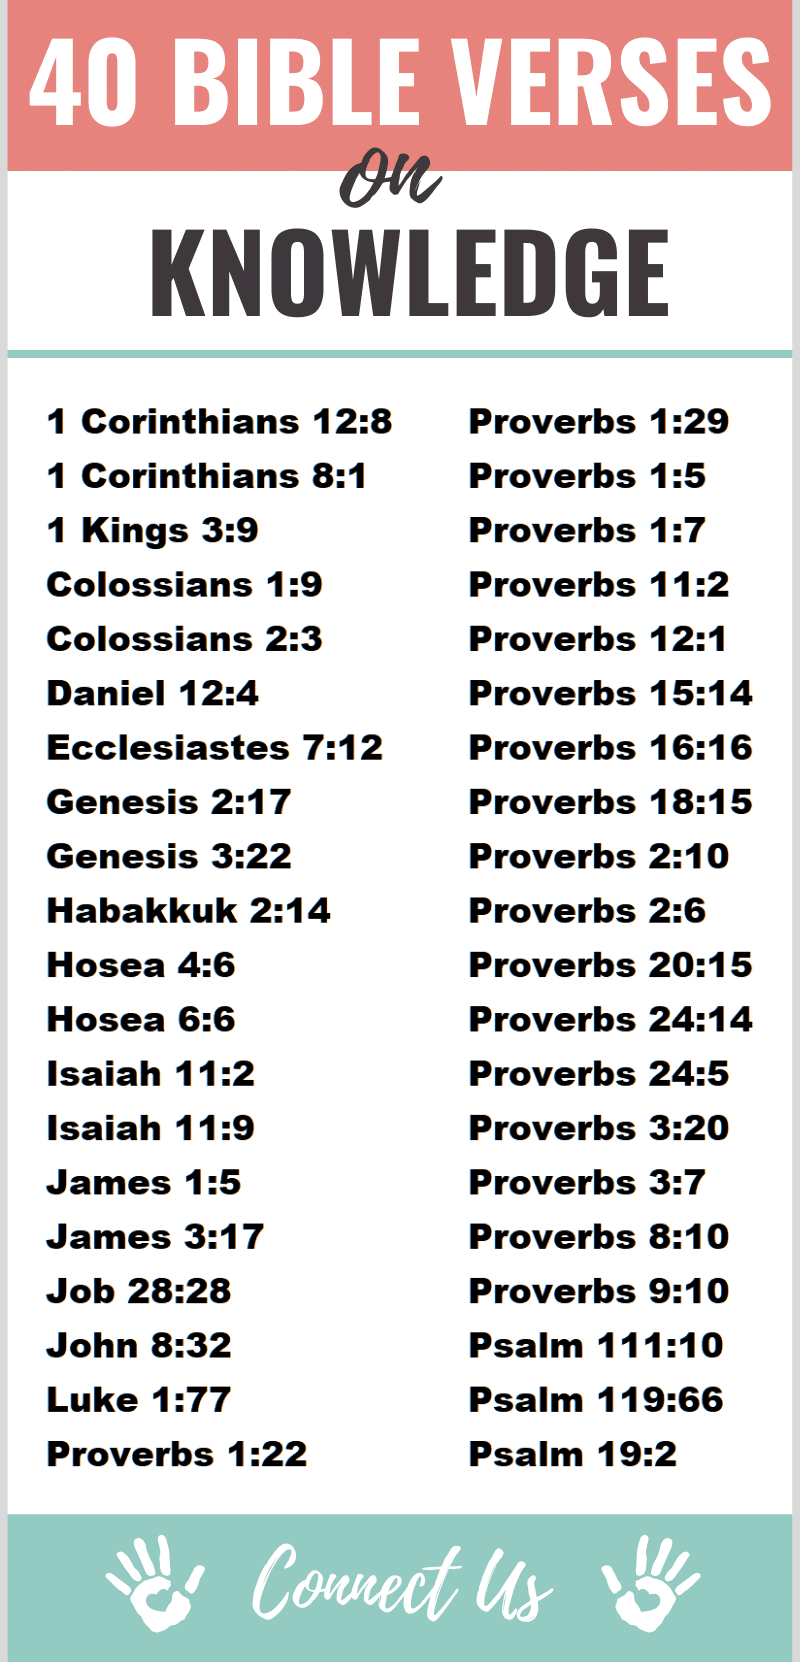 Bible Verses on Knowledge